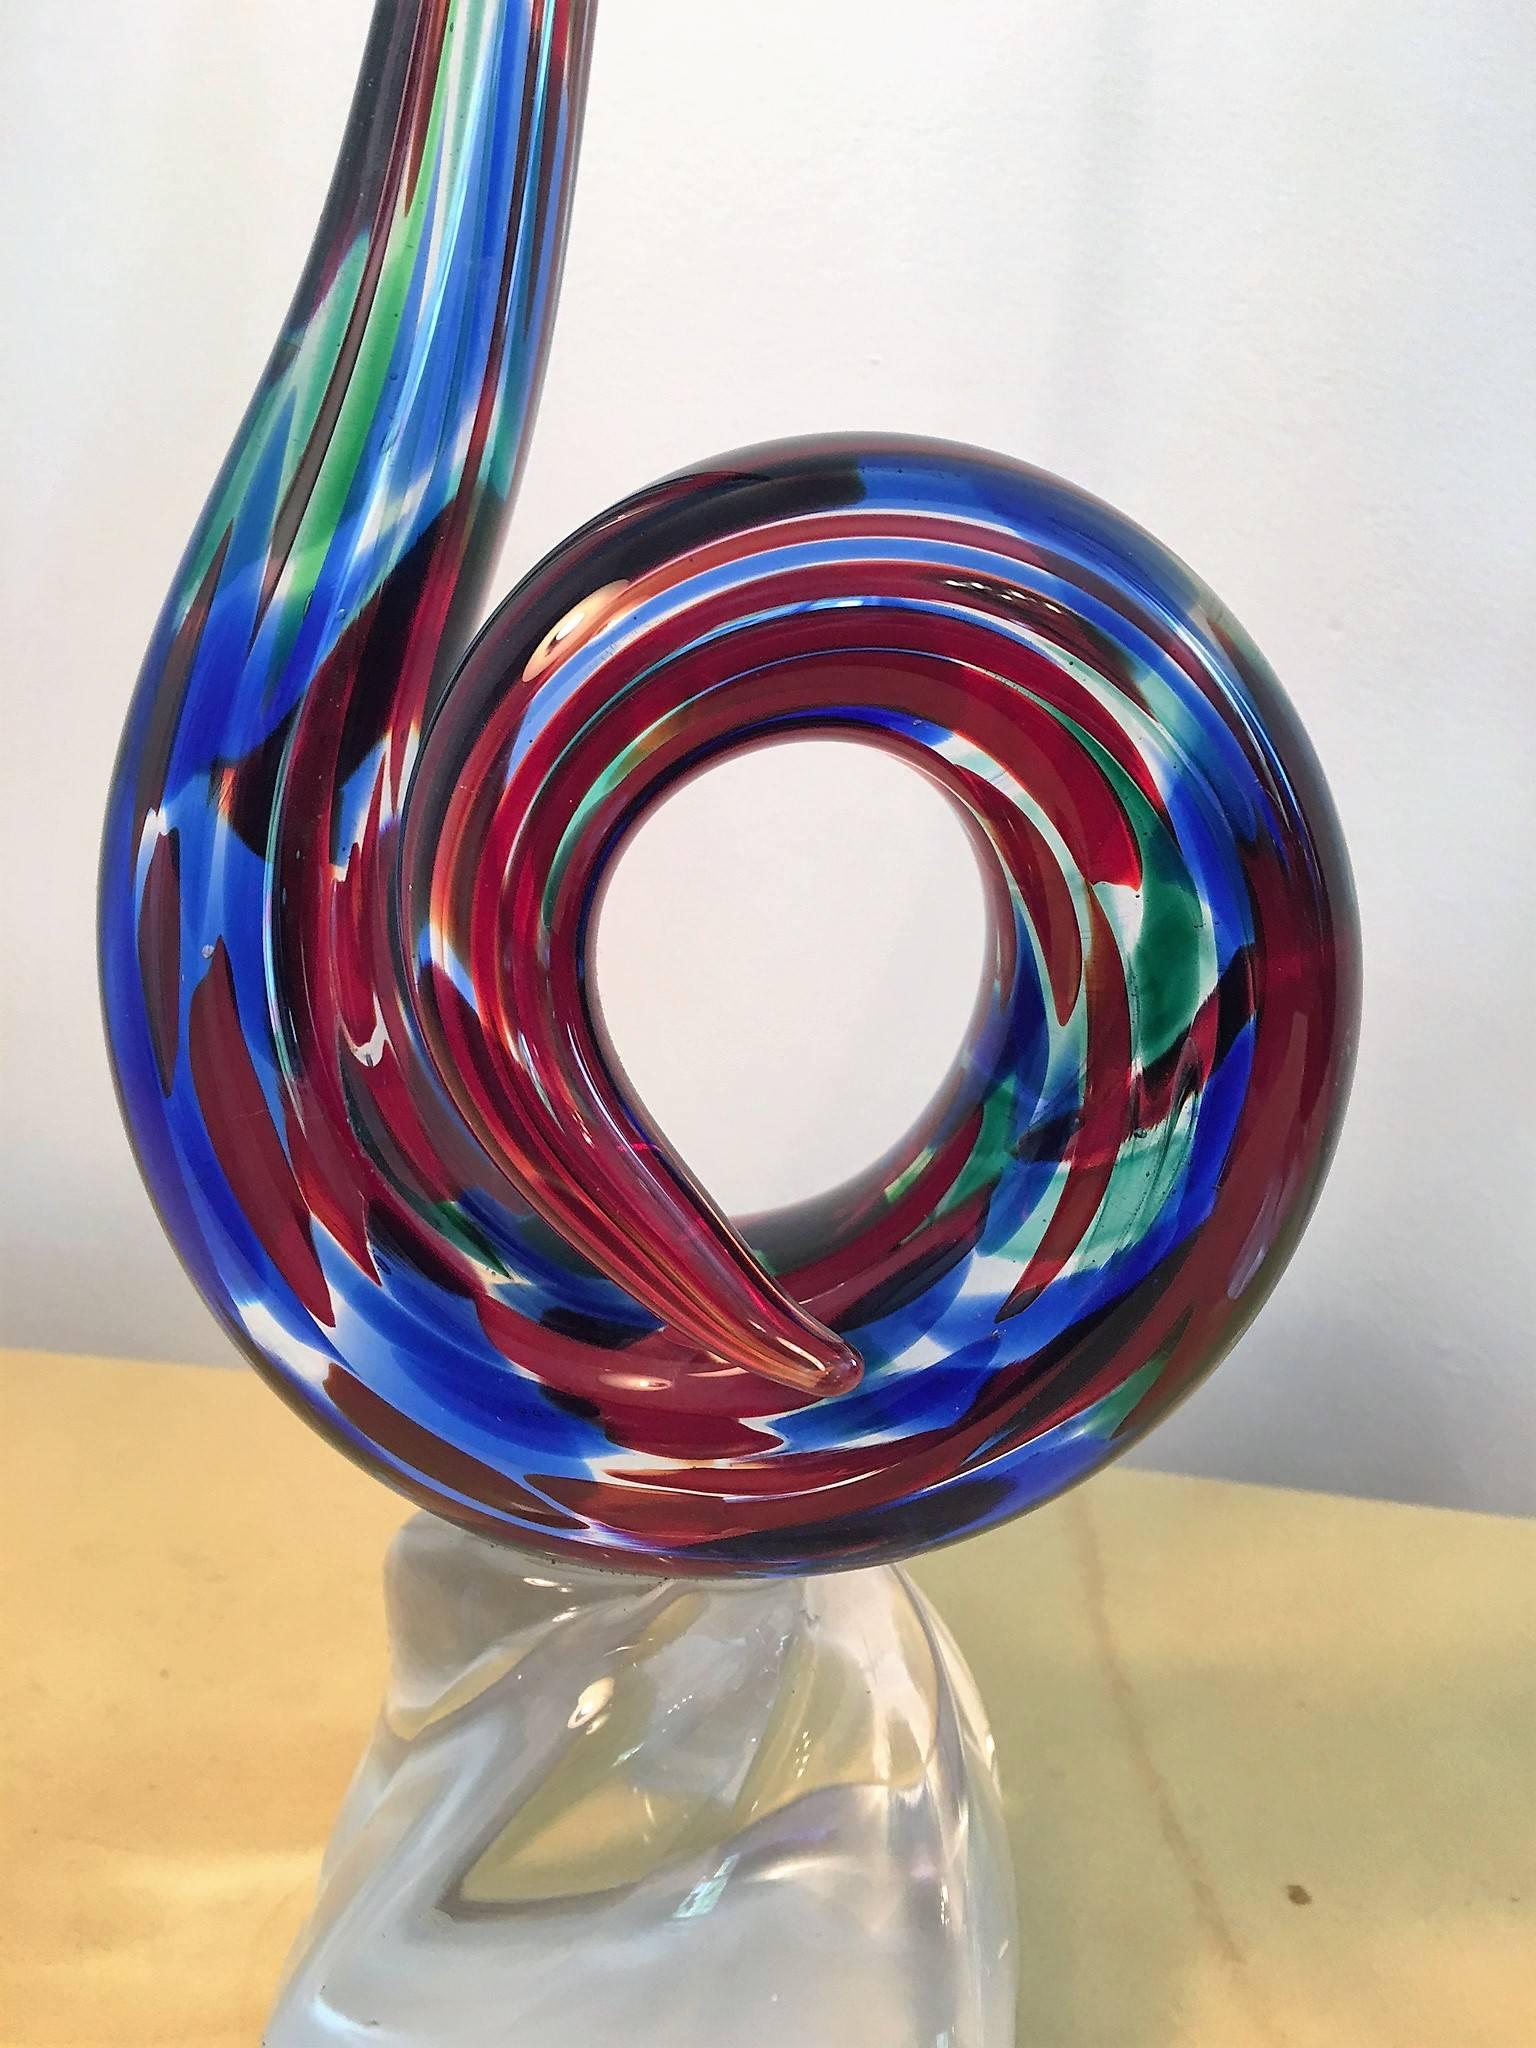 Great modernistic handblown Murano sculptures in perfect condition in the hues used by Italian glass master Fulvio Bianconi the rich jewel tones of blue, red and green set within a clear glass background. Mounted on solid clear glass bases these are